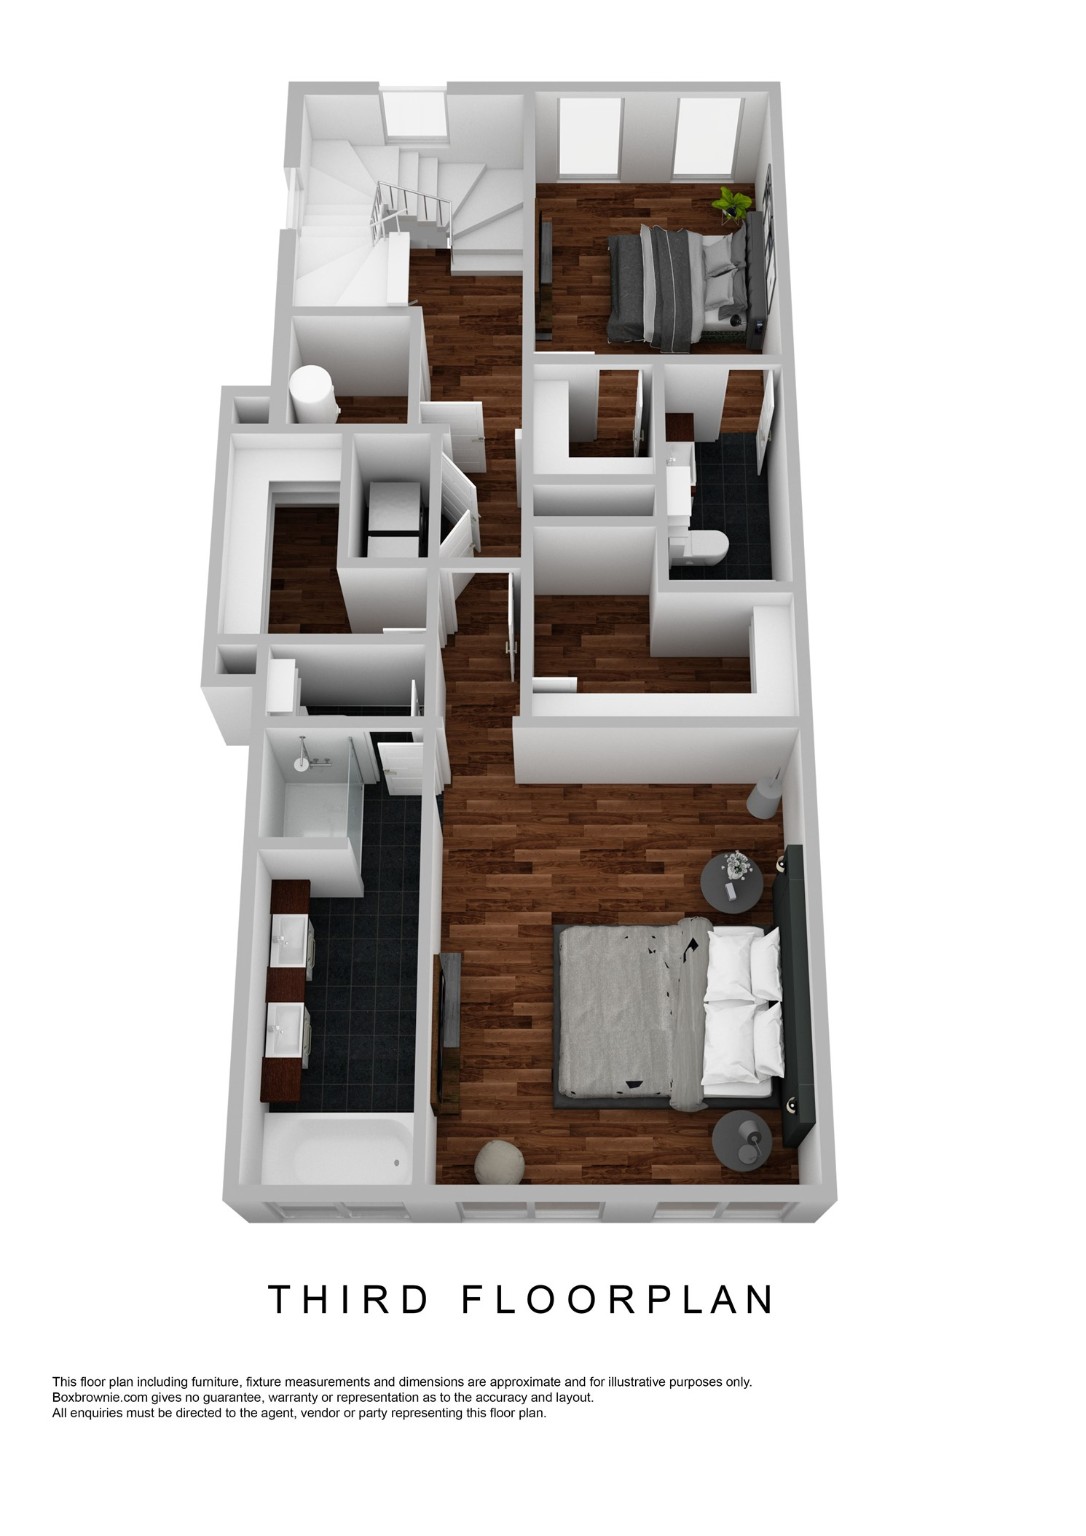 Renderings of the third level. Owners suite and secondary bedroom live on level three. Laundry and elevator access are available on this level.